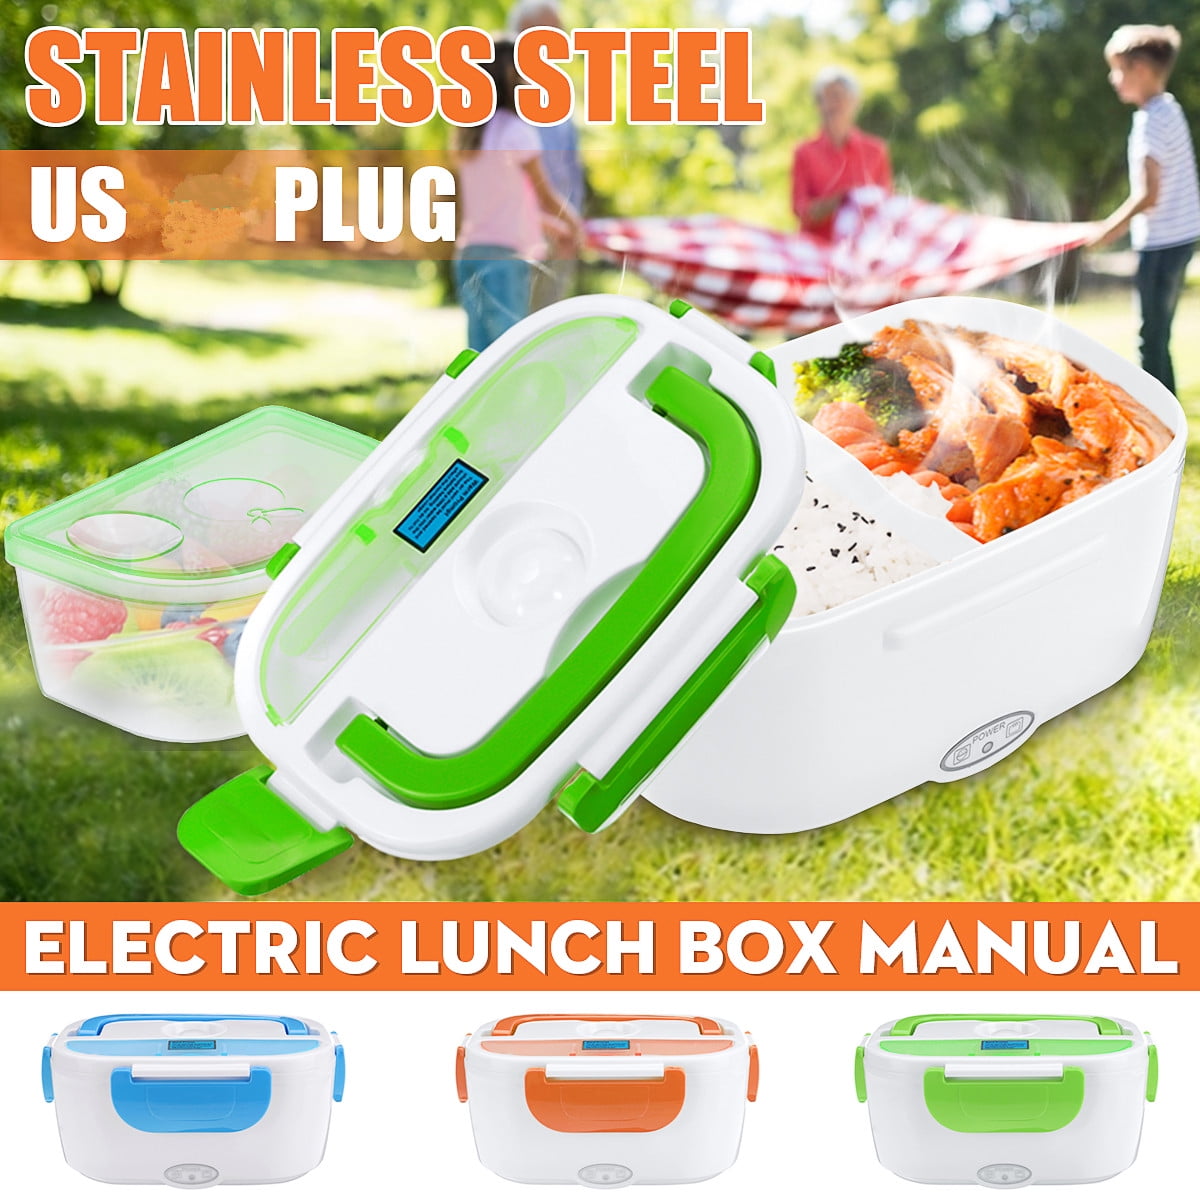 Portable Heated Lunch Box 12V Electric Heating Lunchbox Food Warmer Autos Truck 